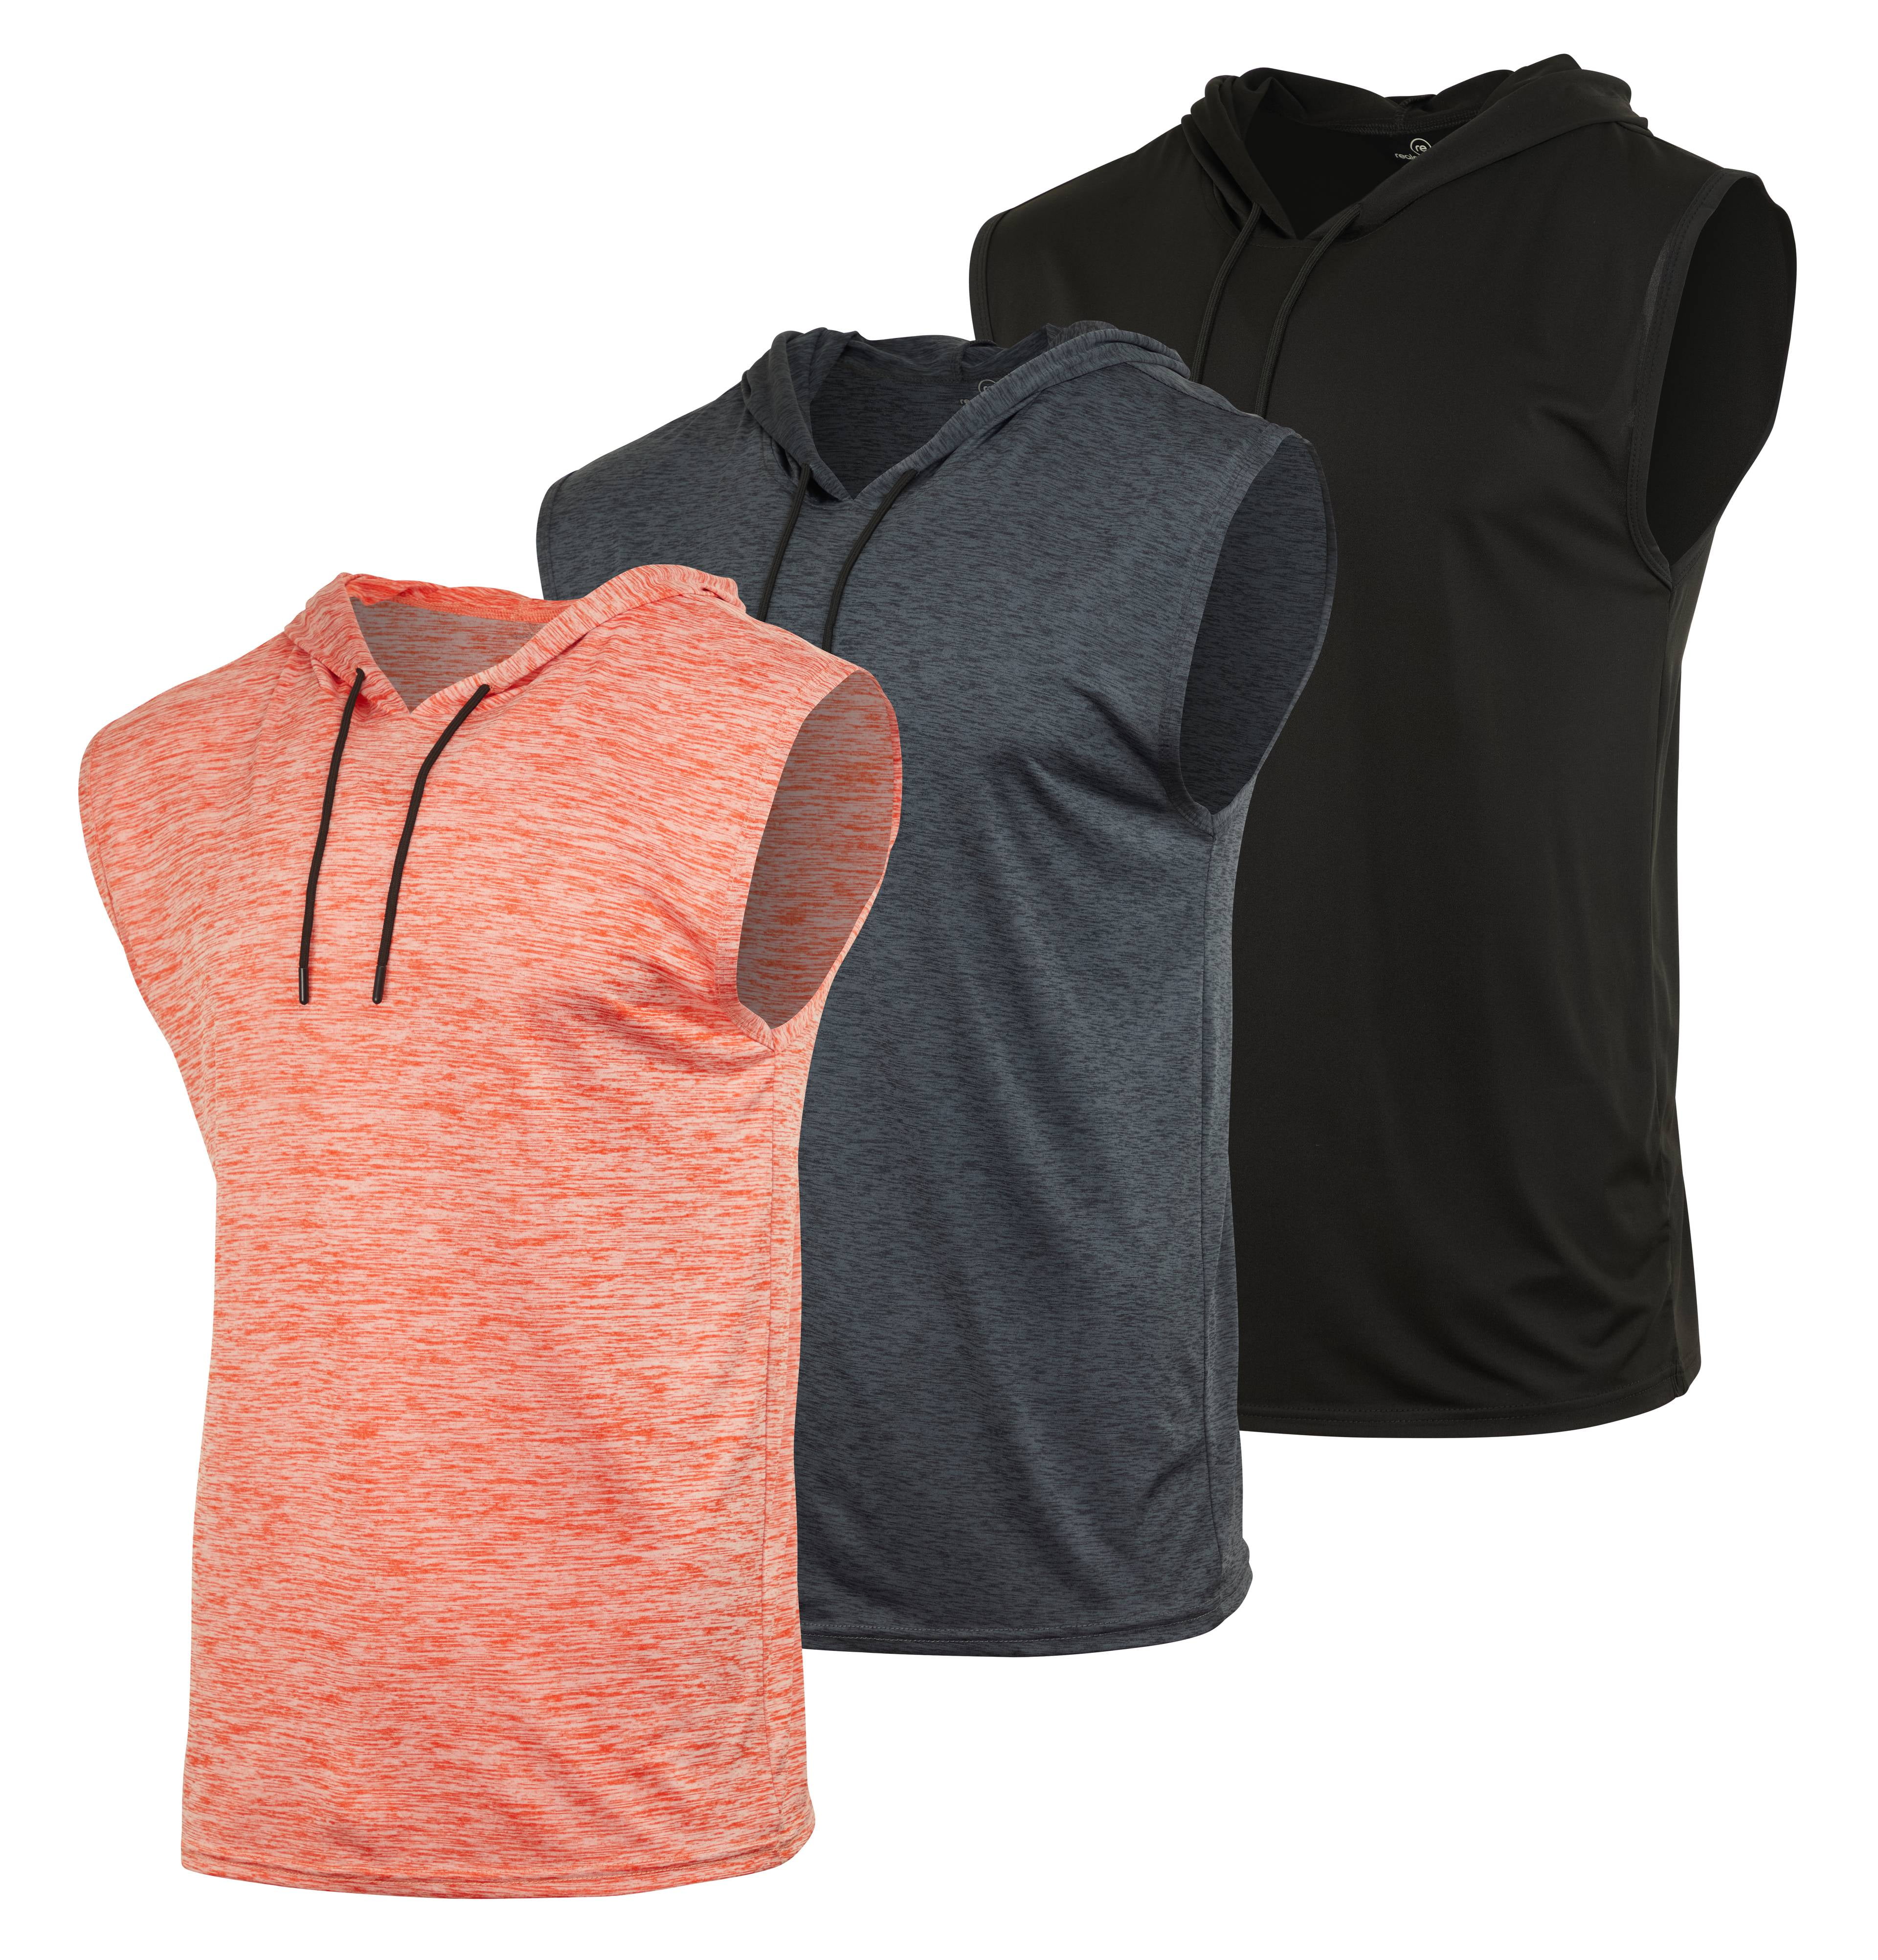 3 Pack: Men's Dry-Fit Active Hooded Tank Top - Workout Sleeveless